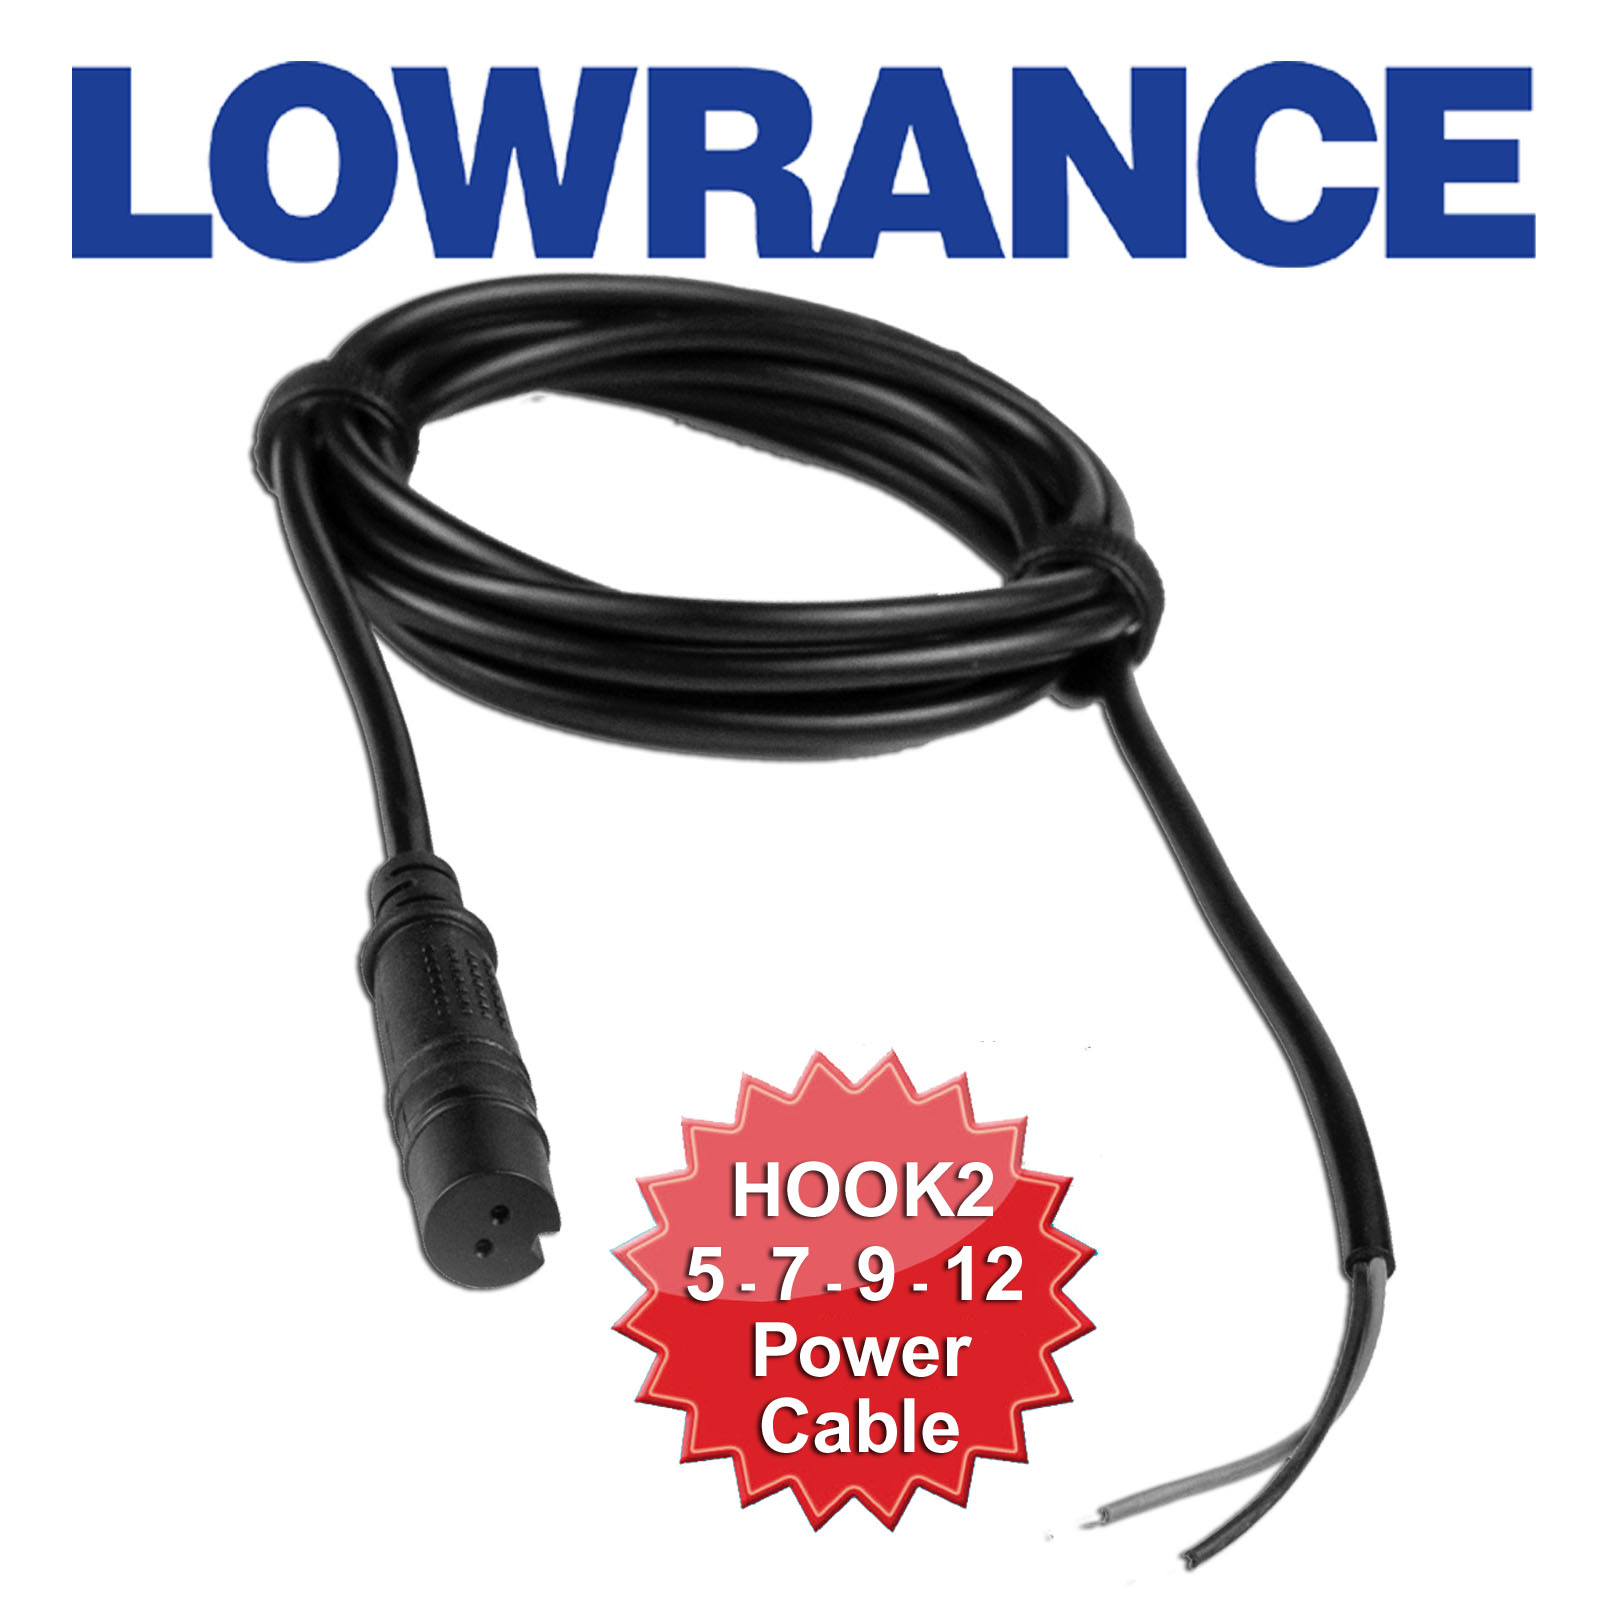 Lowrance Hook2 Reveal Cruise Power Cable Part#: 000-14172-001